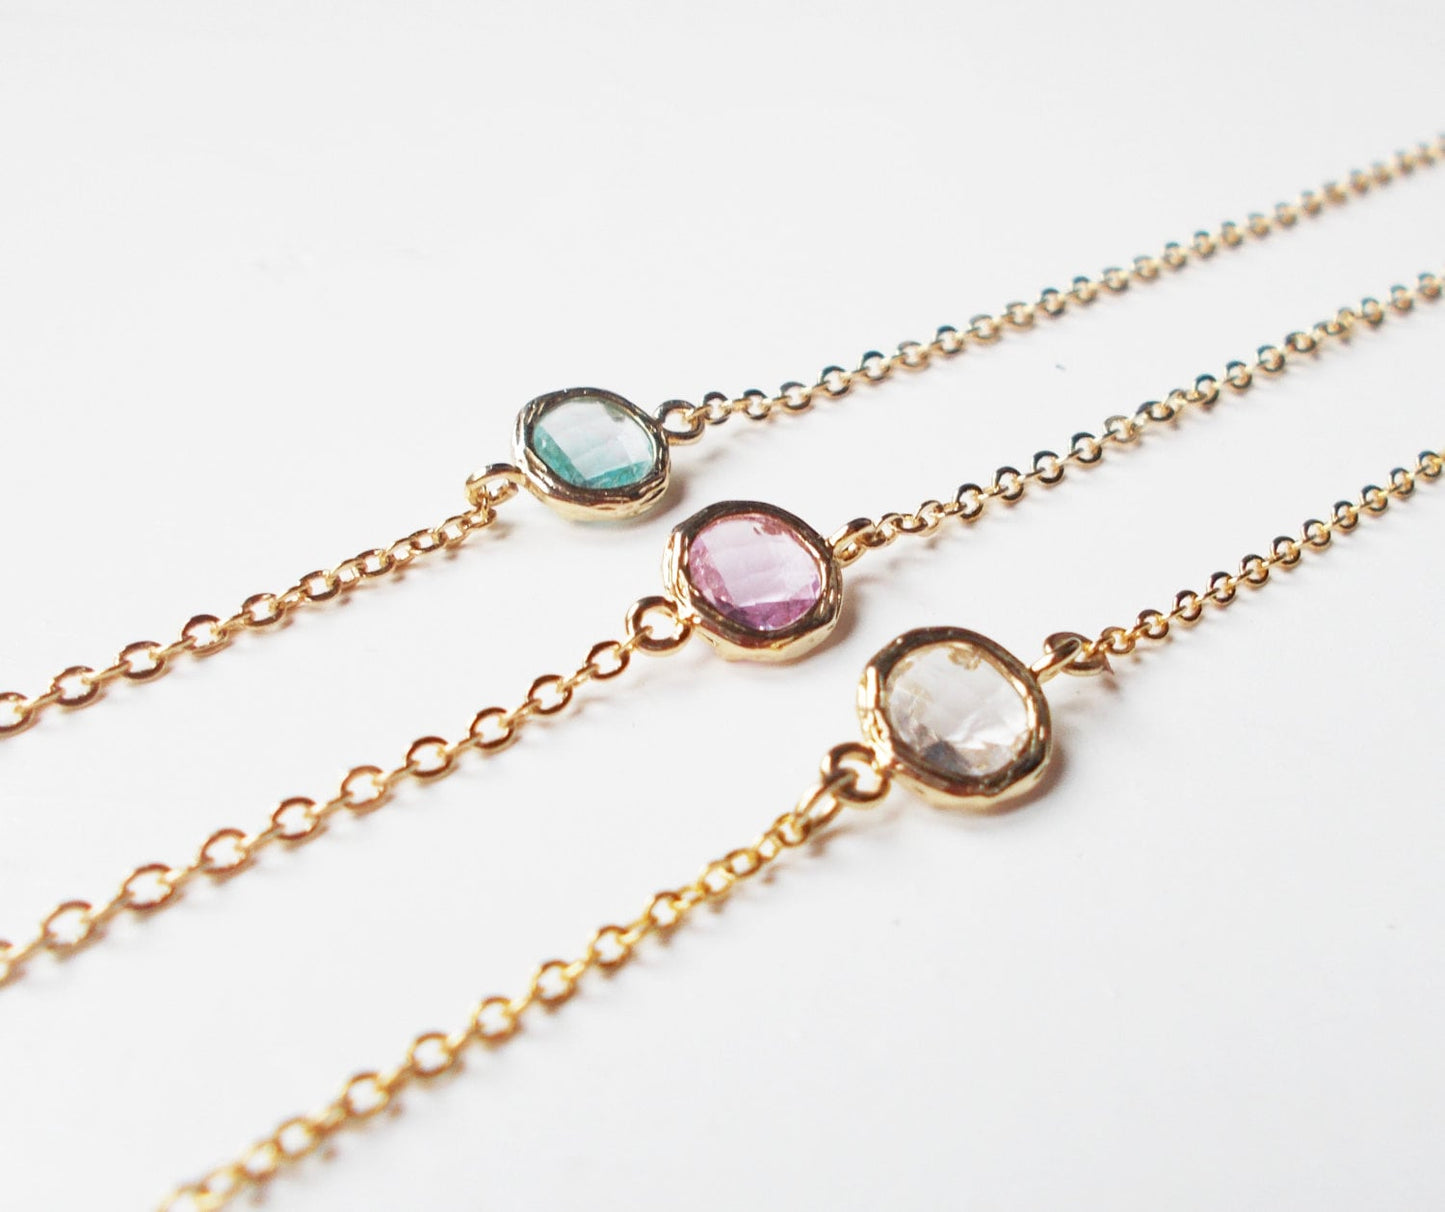 Mini Pop of Color Gold and Glass Connector Stacking Necklace - BridesMaid Gift - Gemstone Necklace - Birthstone - Mother's Day Gift